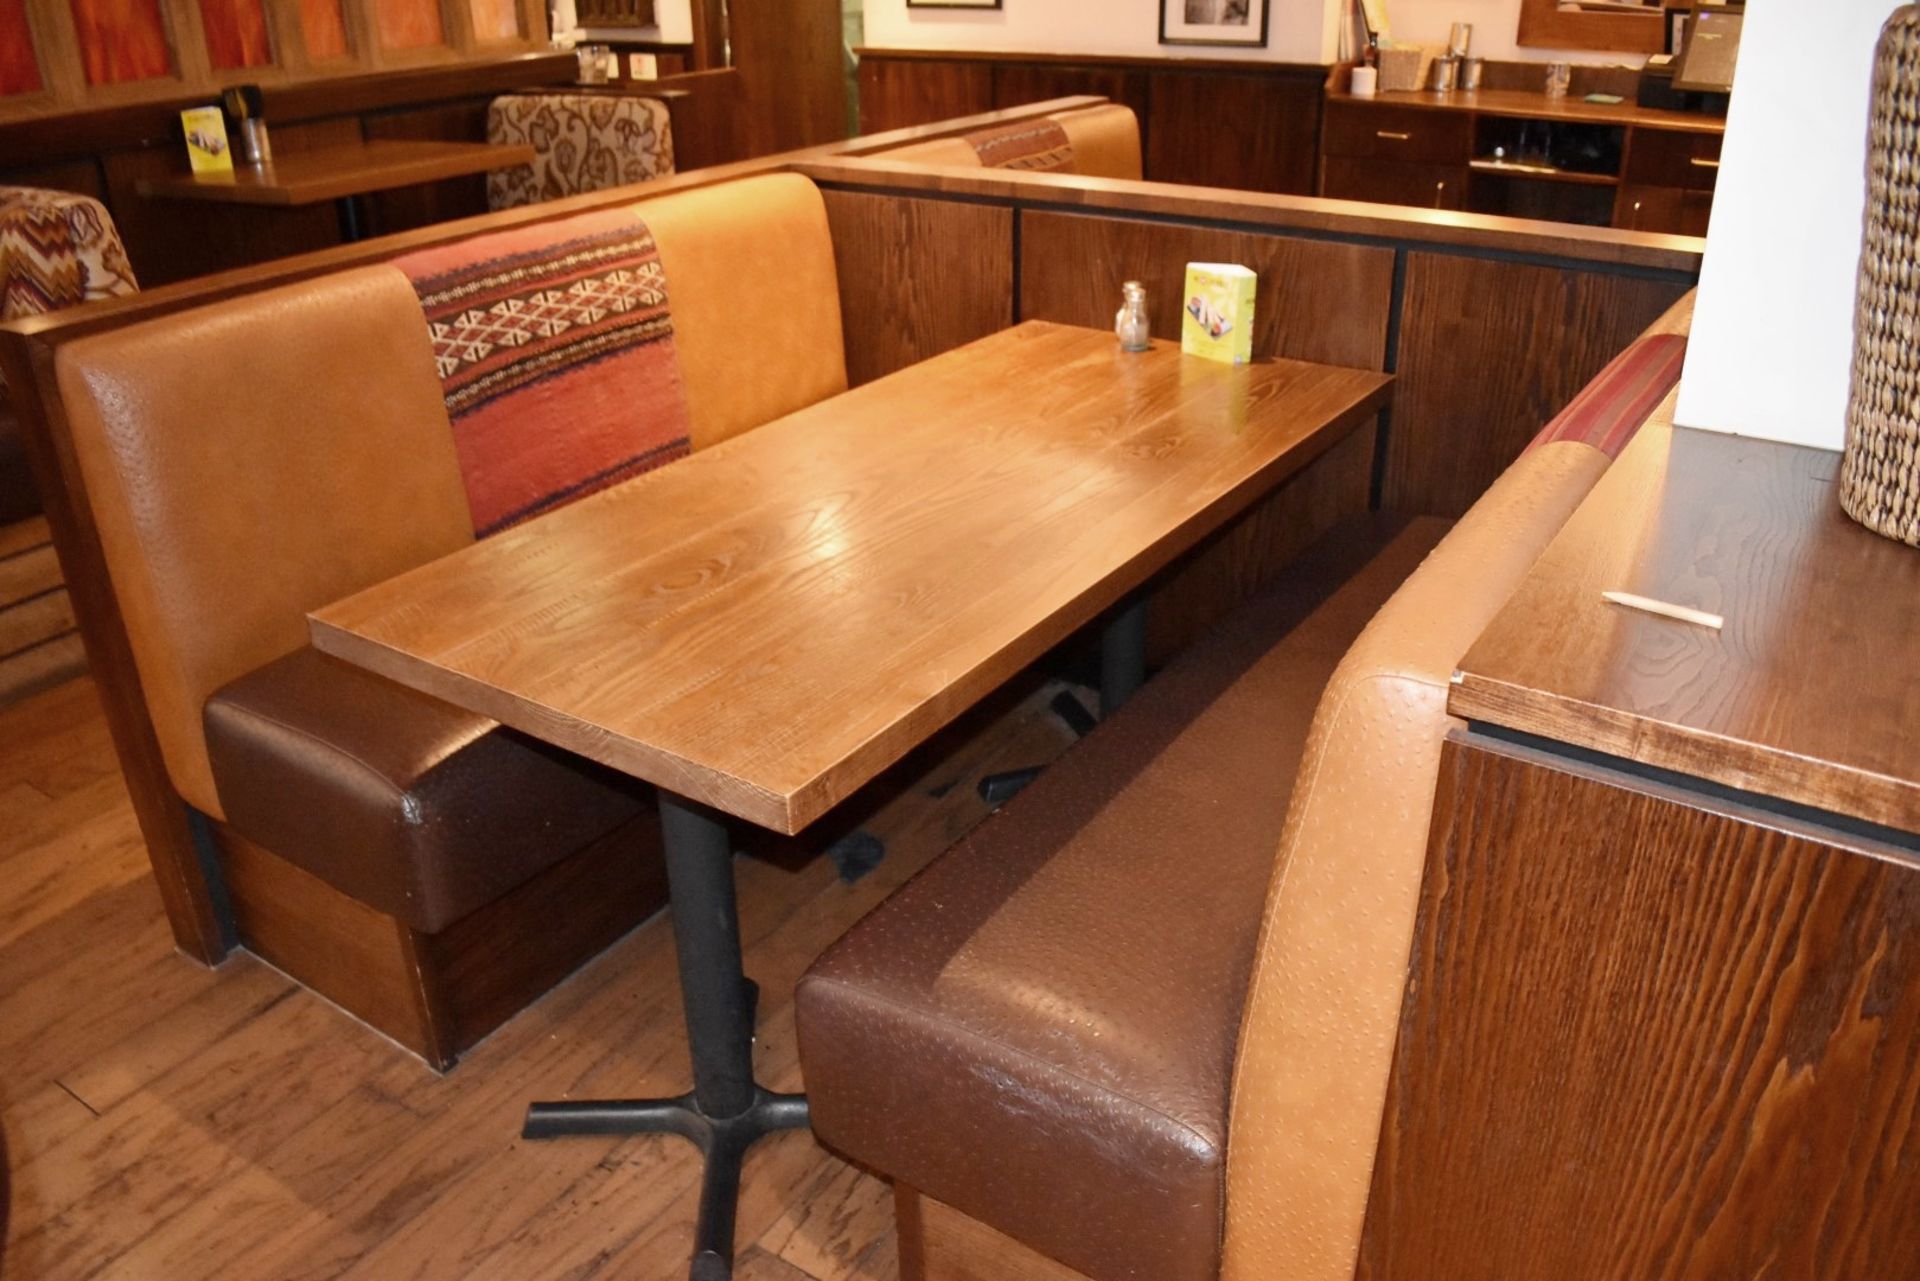 15-Pieces Of Restaurant Booth Seating Of Varying Length - Image 22 of 22